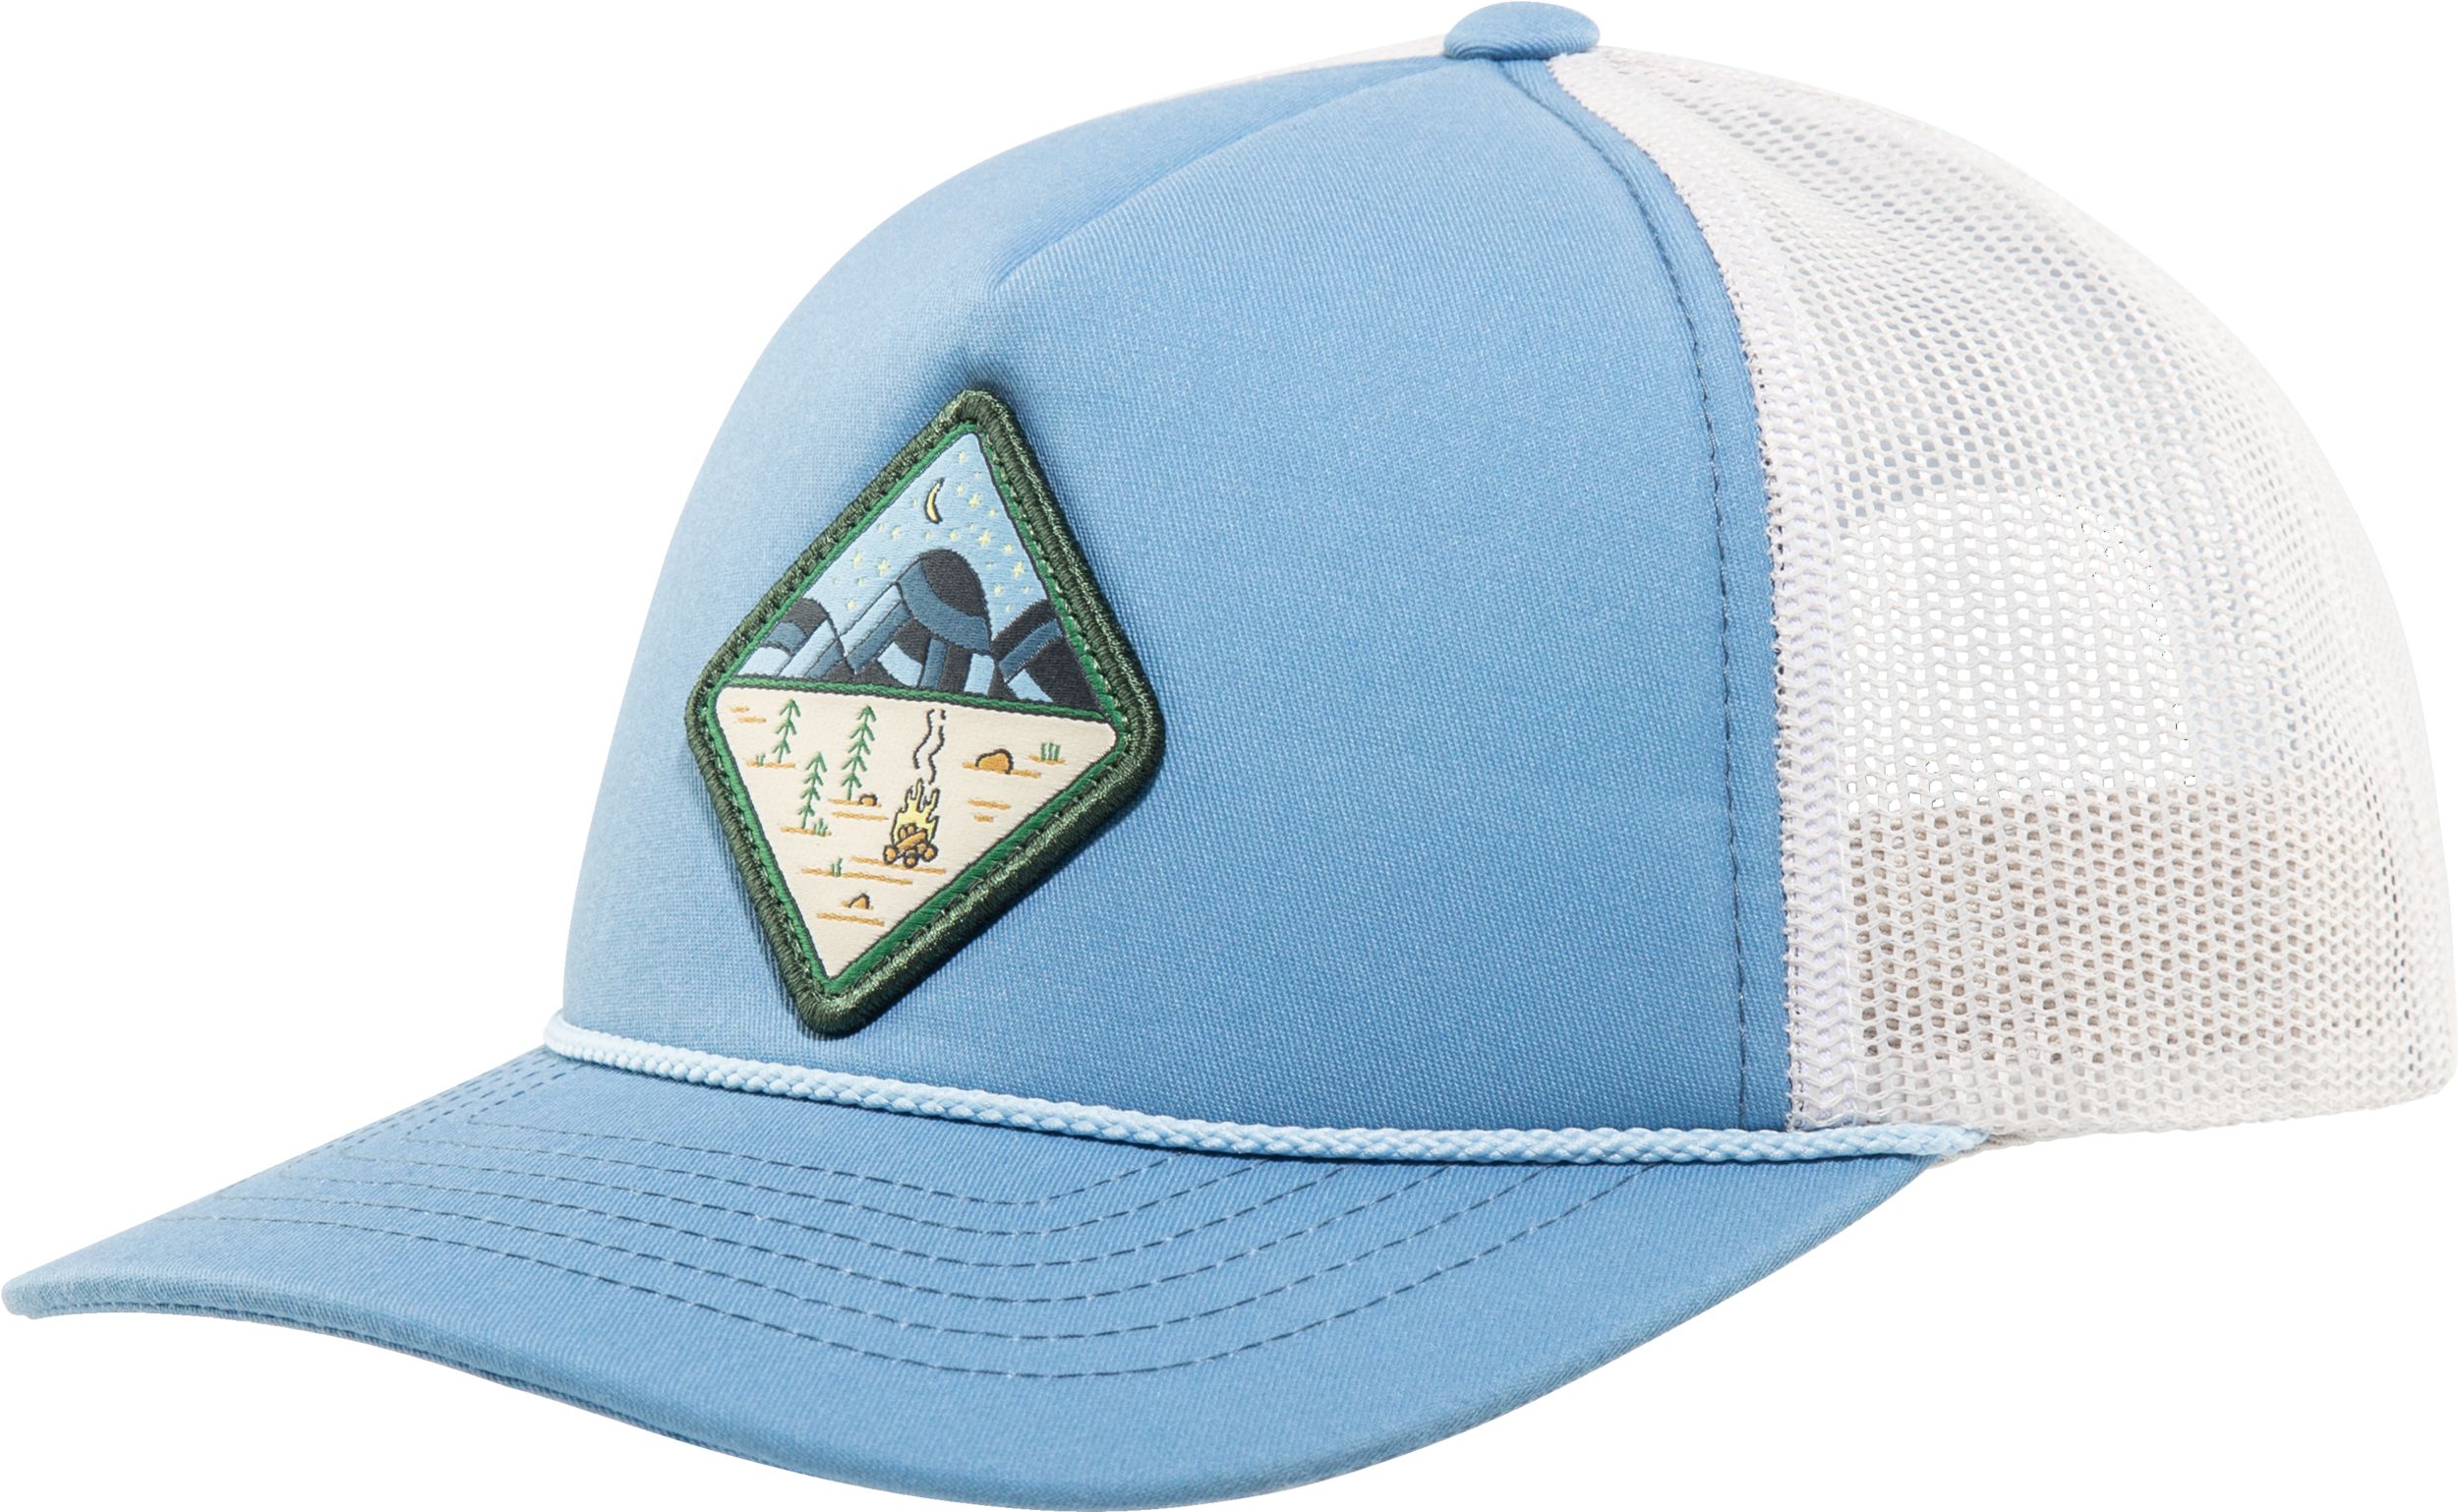 Trucker Hats for Sale - Oyster Bamboo Hat- Legacy Old Favorite